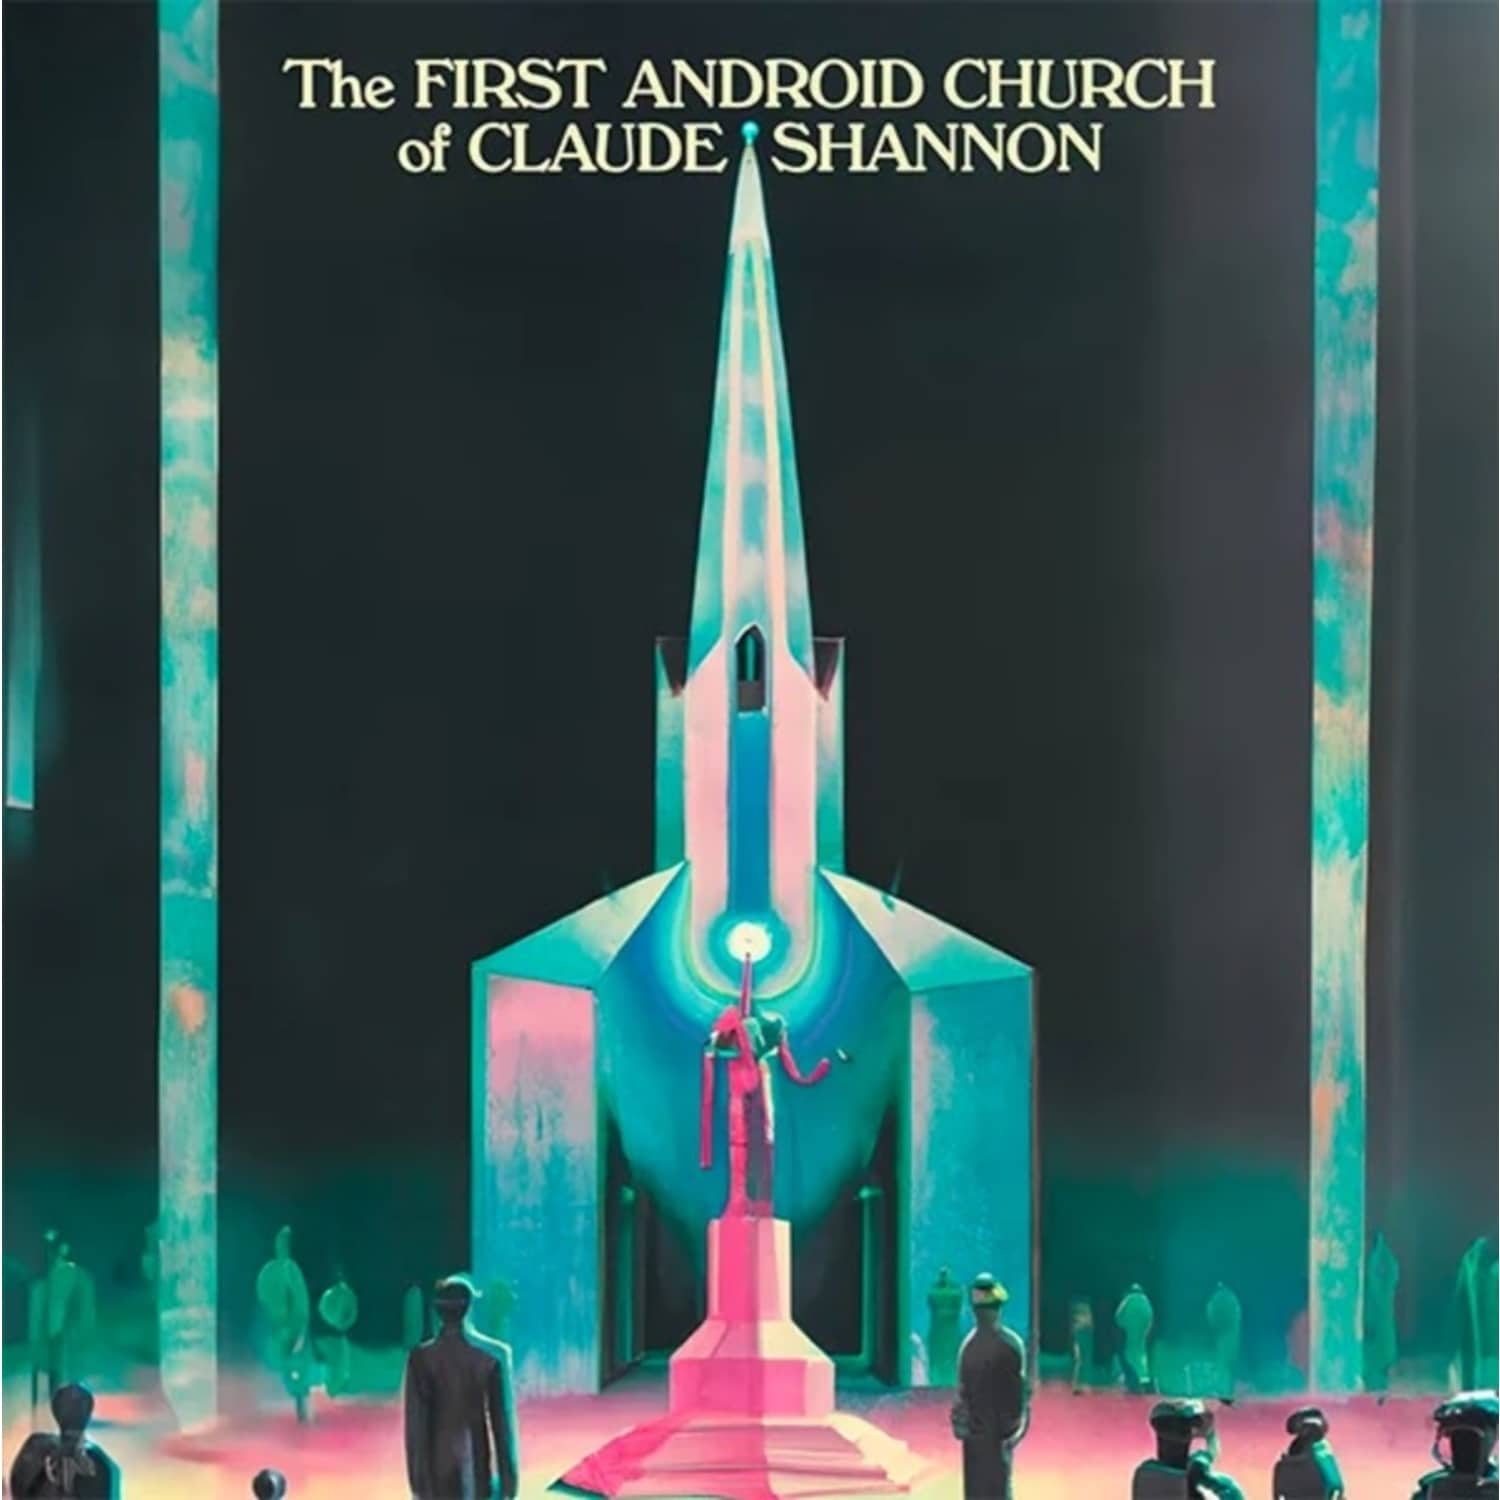 Roger Gerressen - THE FIRST ANDROID CHURCH OF CLAUDE SHANNON 